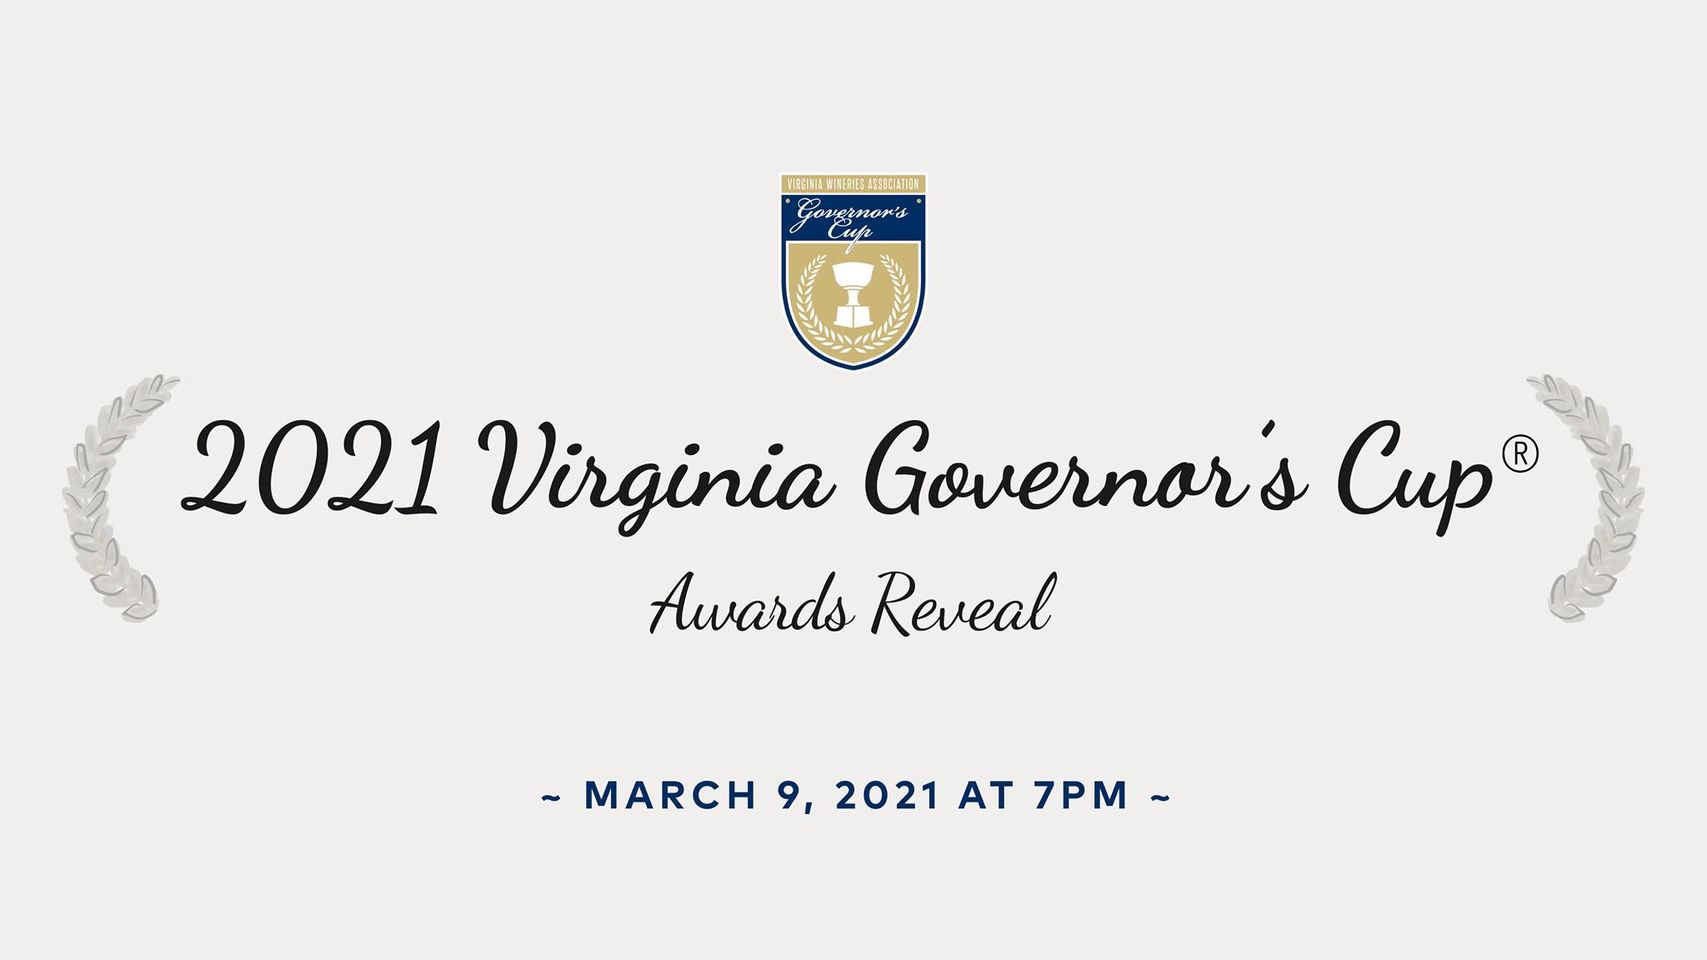 2021 Virginia Governor's Cup Awards Reveal